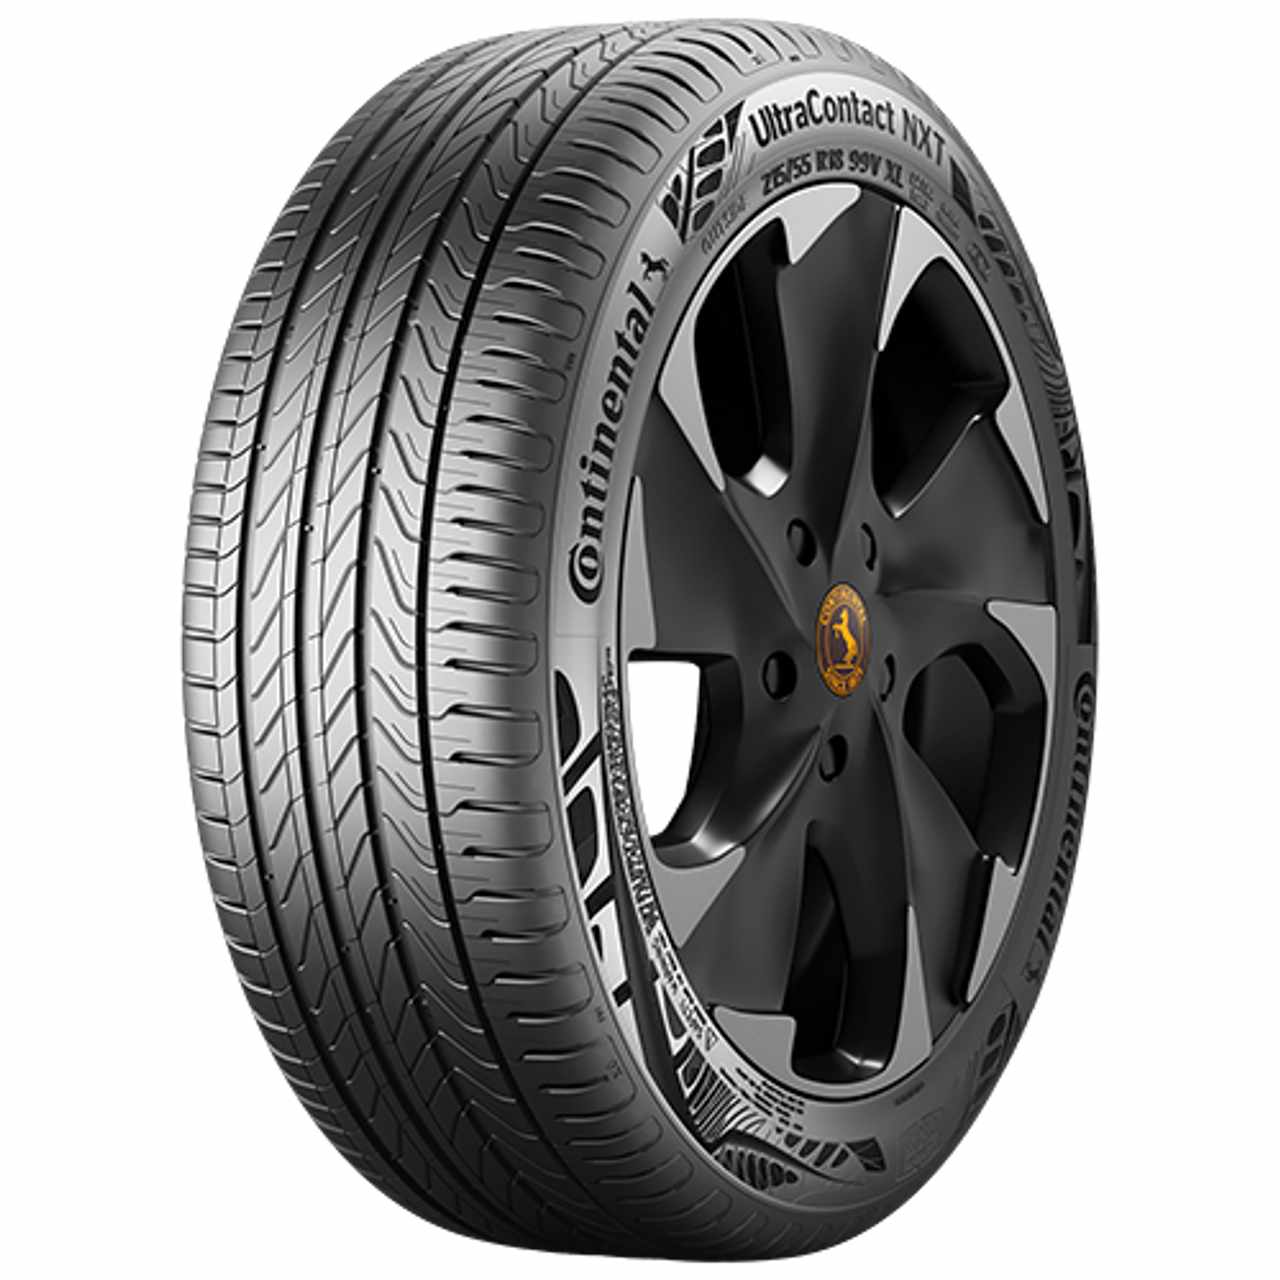 CONTINENTAL ULTRACONTACT NXT (EVc) 225/55R18 102V FR BSW